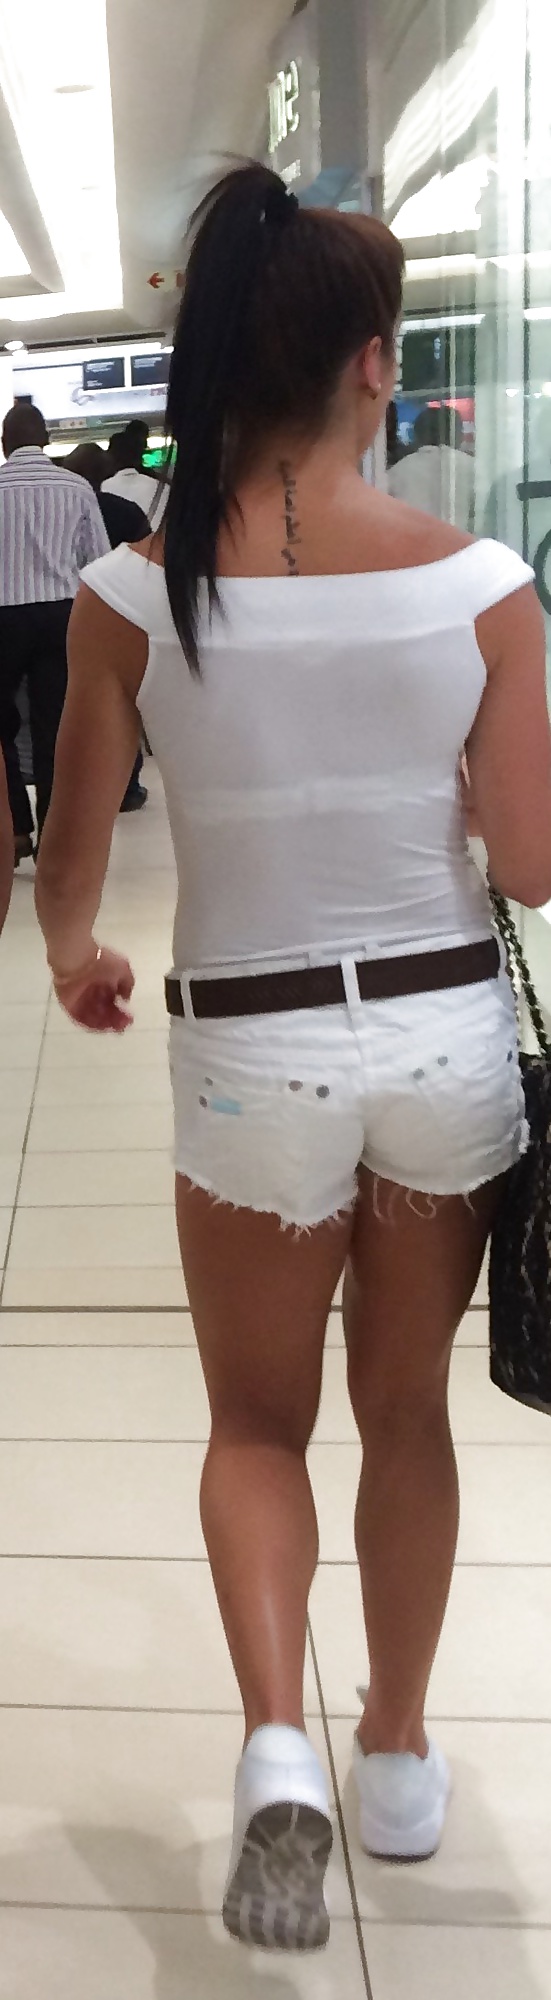 Free Tight tanned mall teen white shorts photos